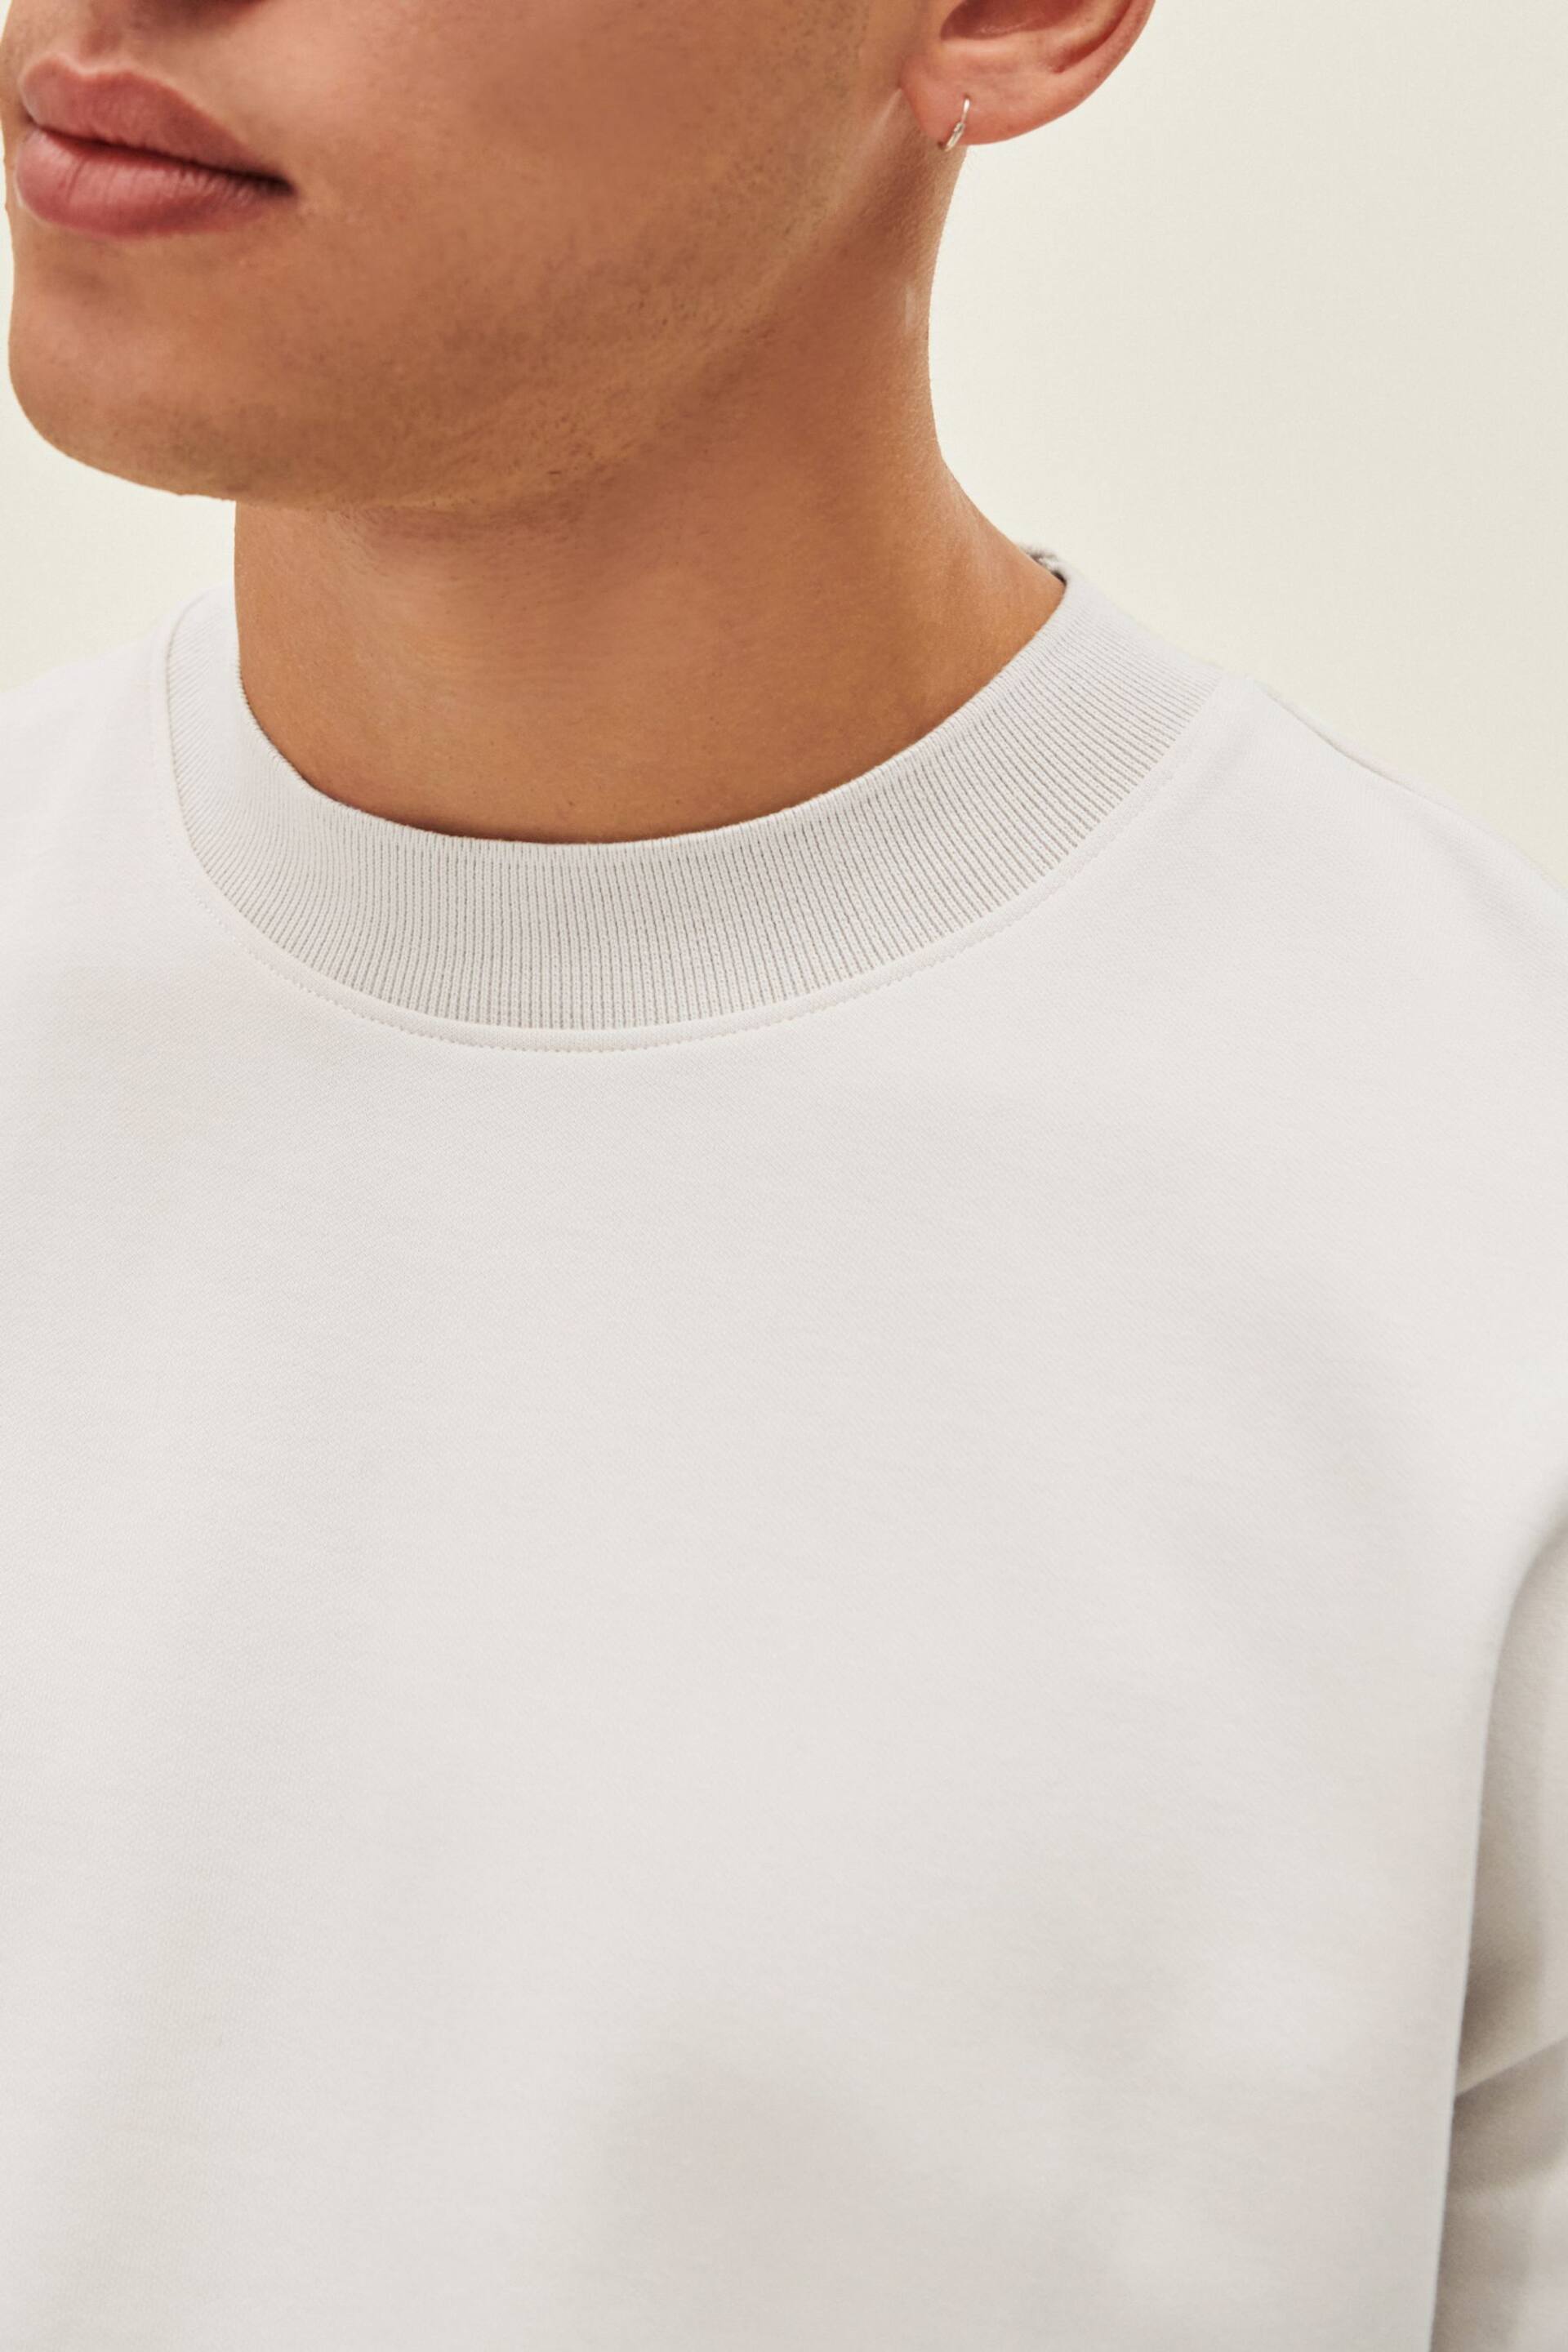 White Relaxed Fit Soft Touch Heavyweight T-Shirt - Image 4 of 7